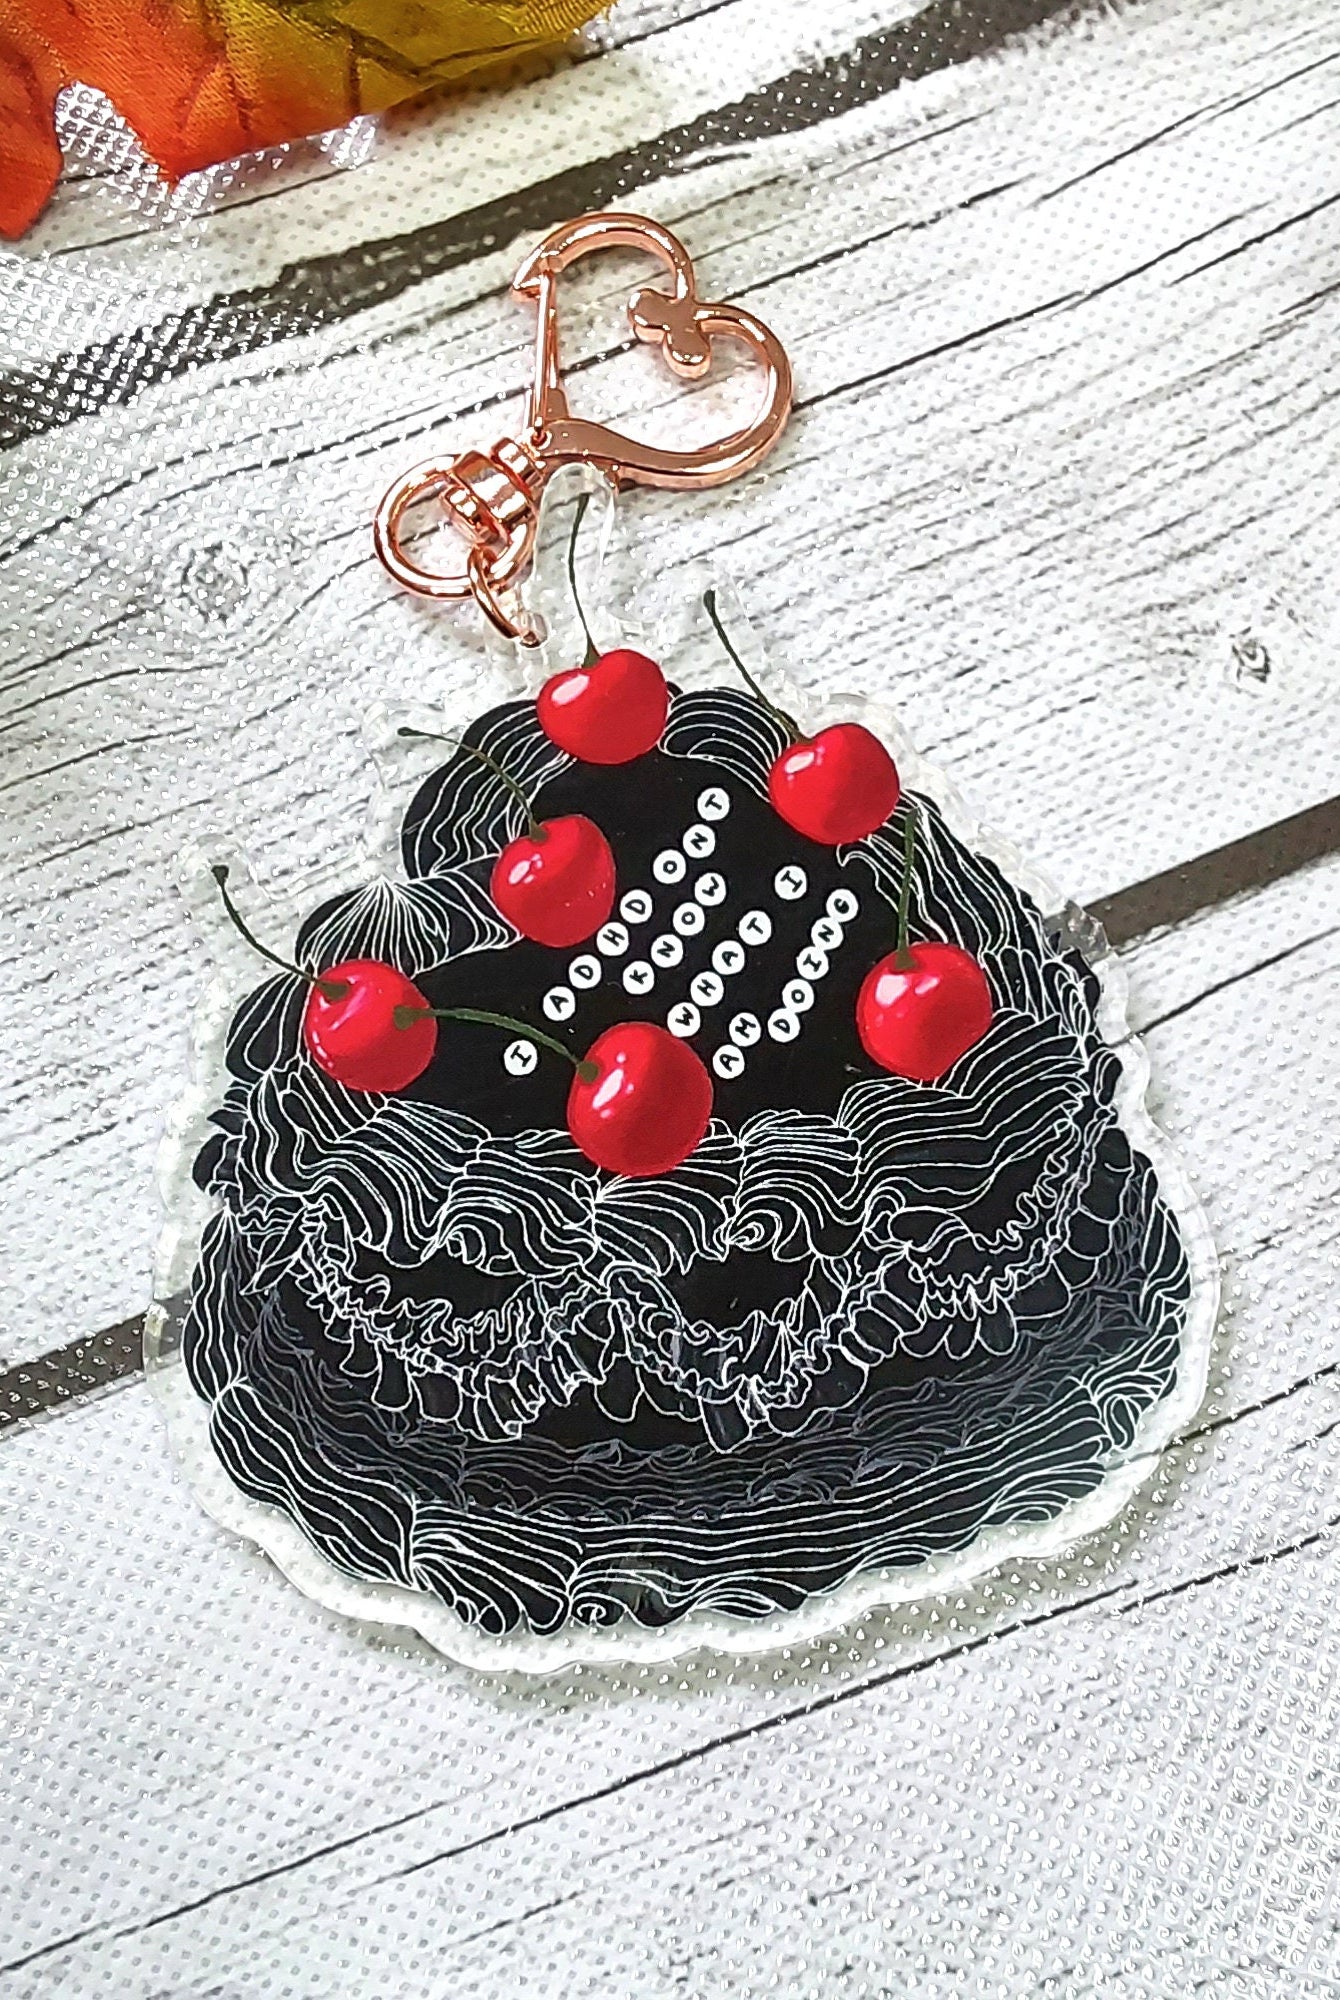 ACRYLIC CHARM Double Sided: Black I ADHD'ont Know What I Am Doing Cake , Cake Charm , Funny Decorative Charm , Cake Acrylic Charm